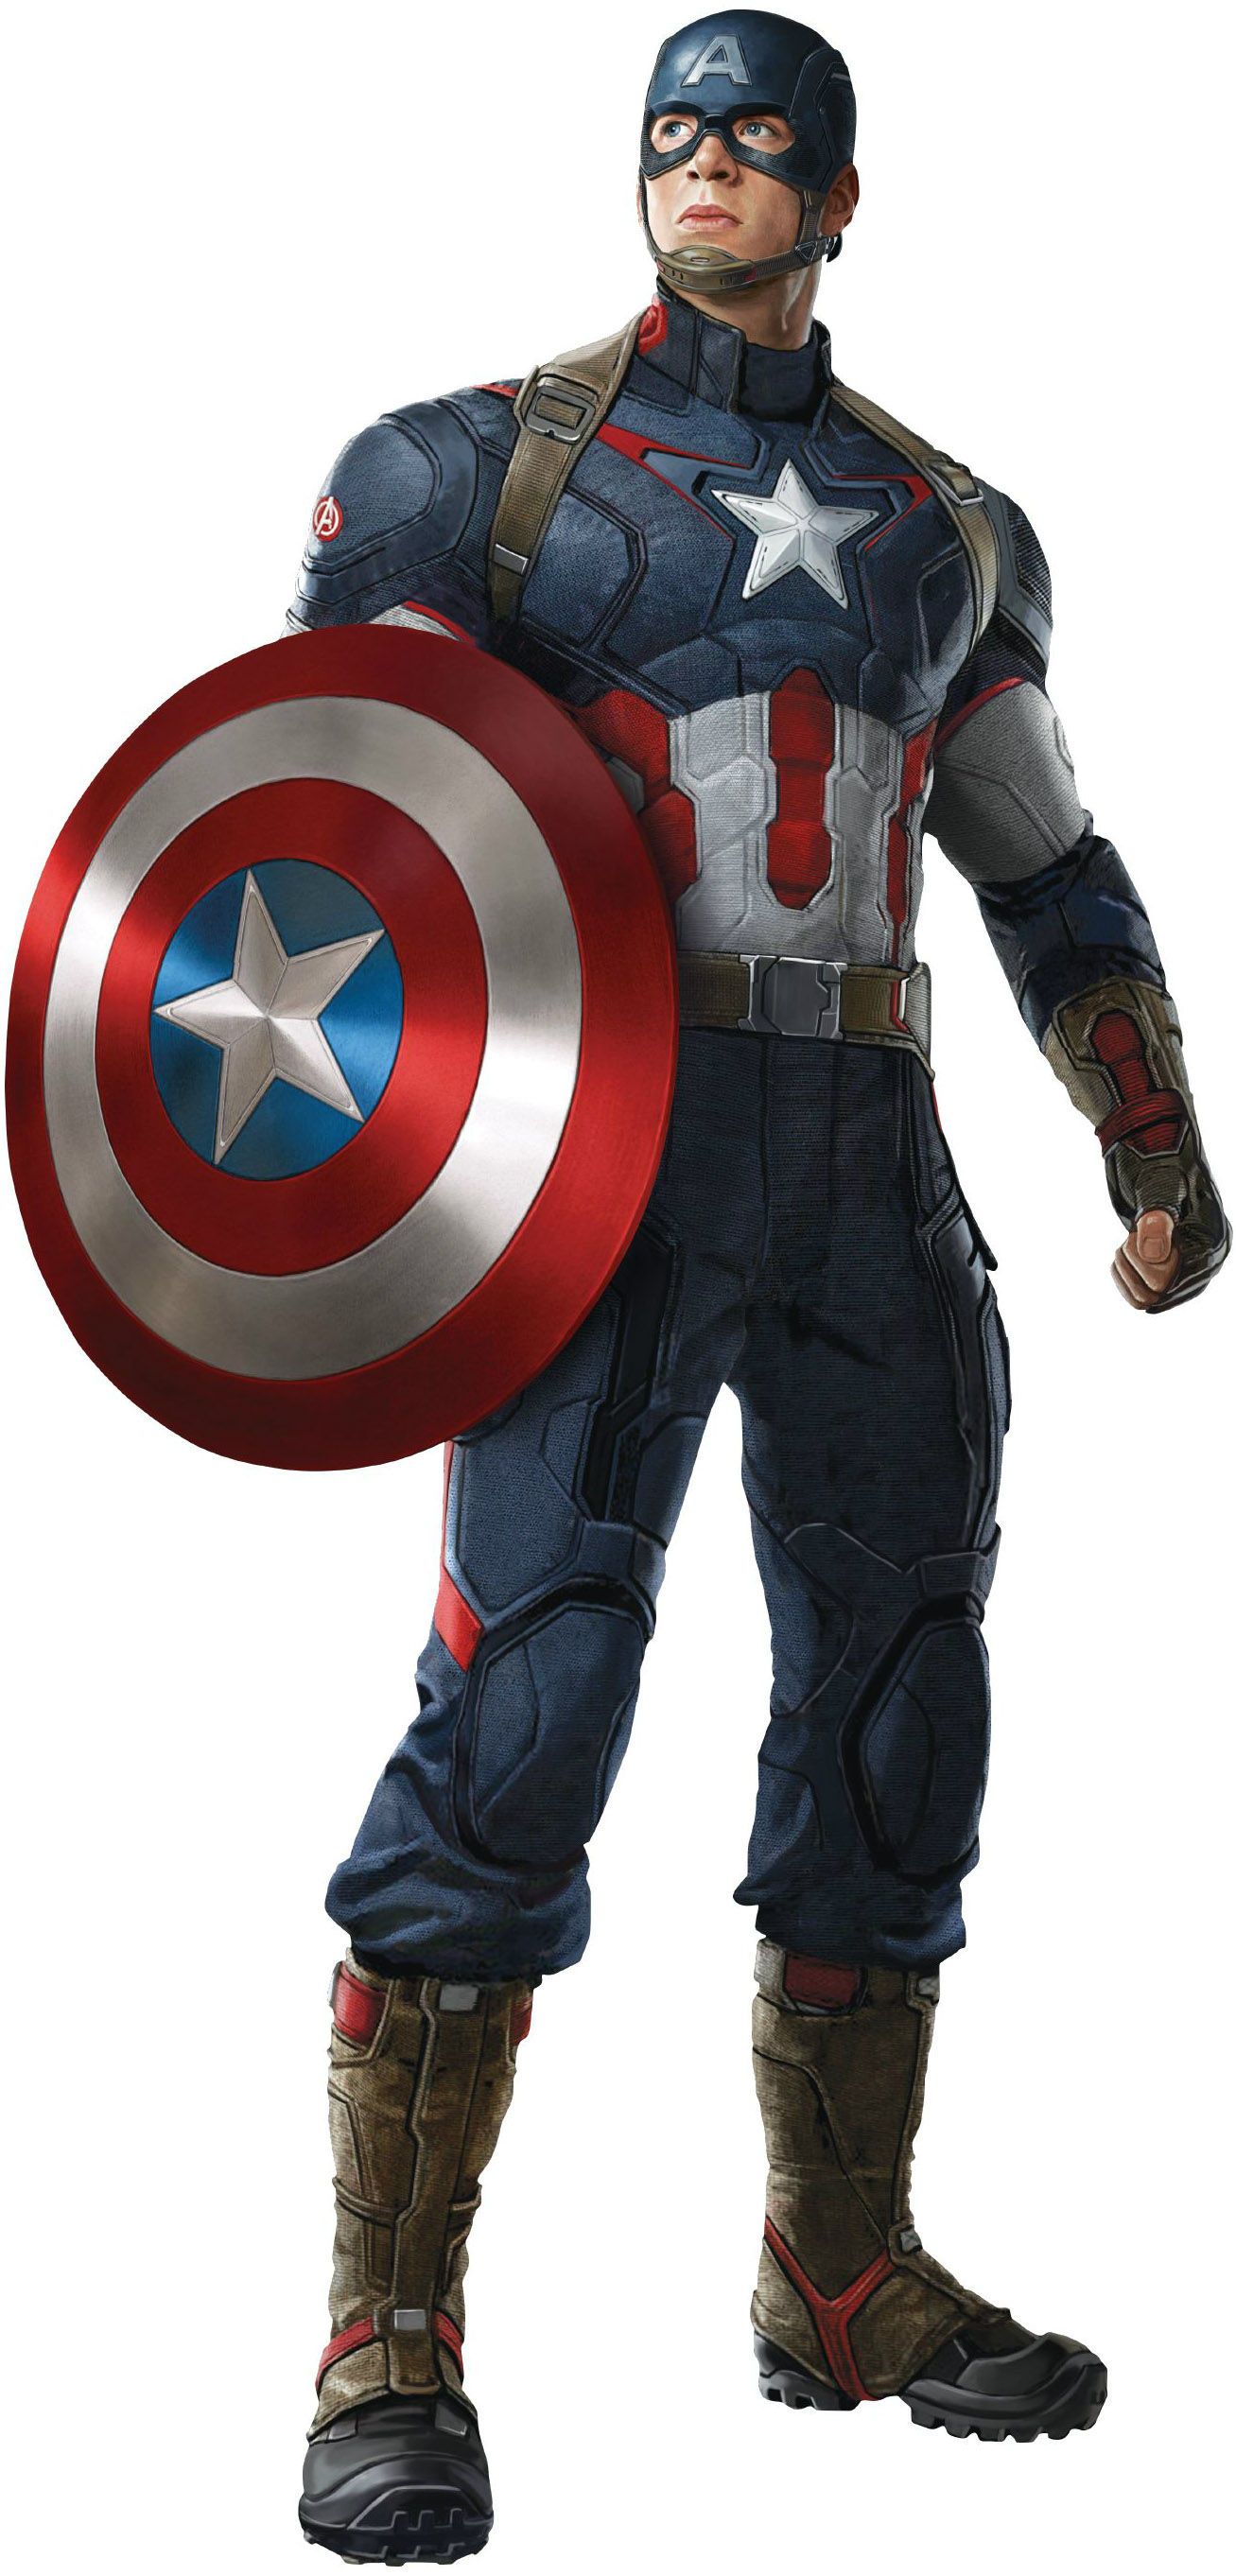 Captain America Costume Promo Art (from Avengers Age of Ultron)